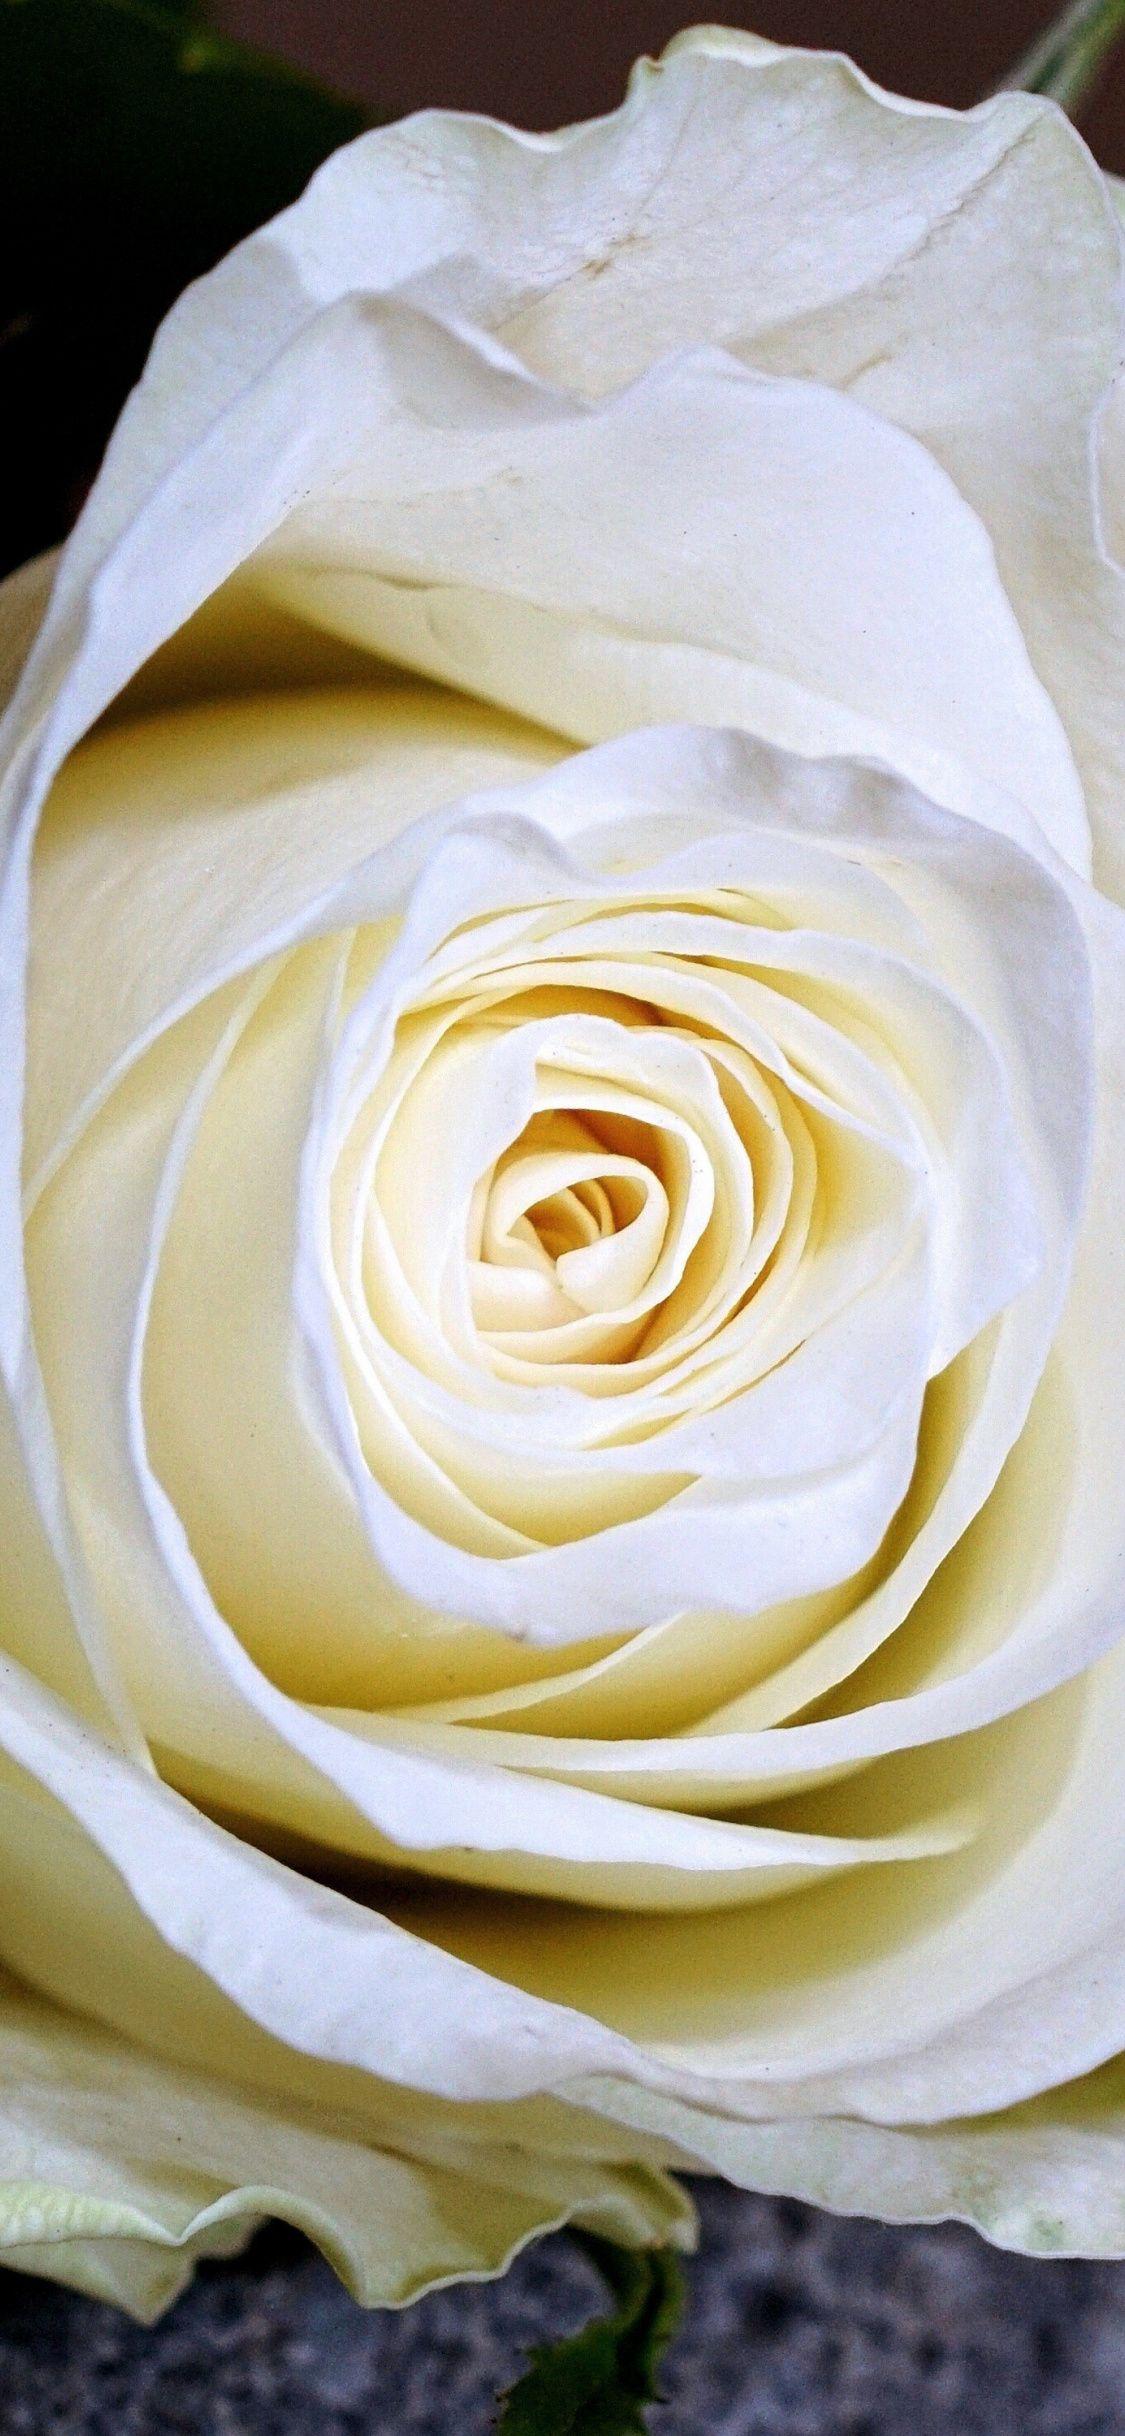 White Rose iPhone Wallpapers - Top Free White Rose iPhone Backgrounds